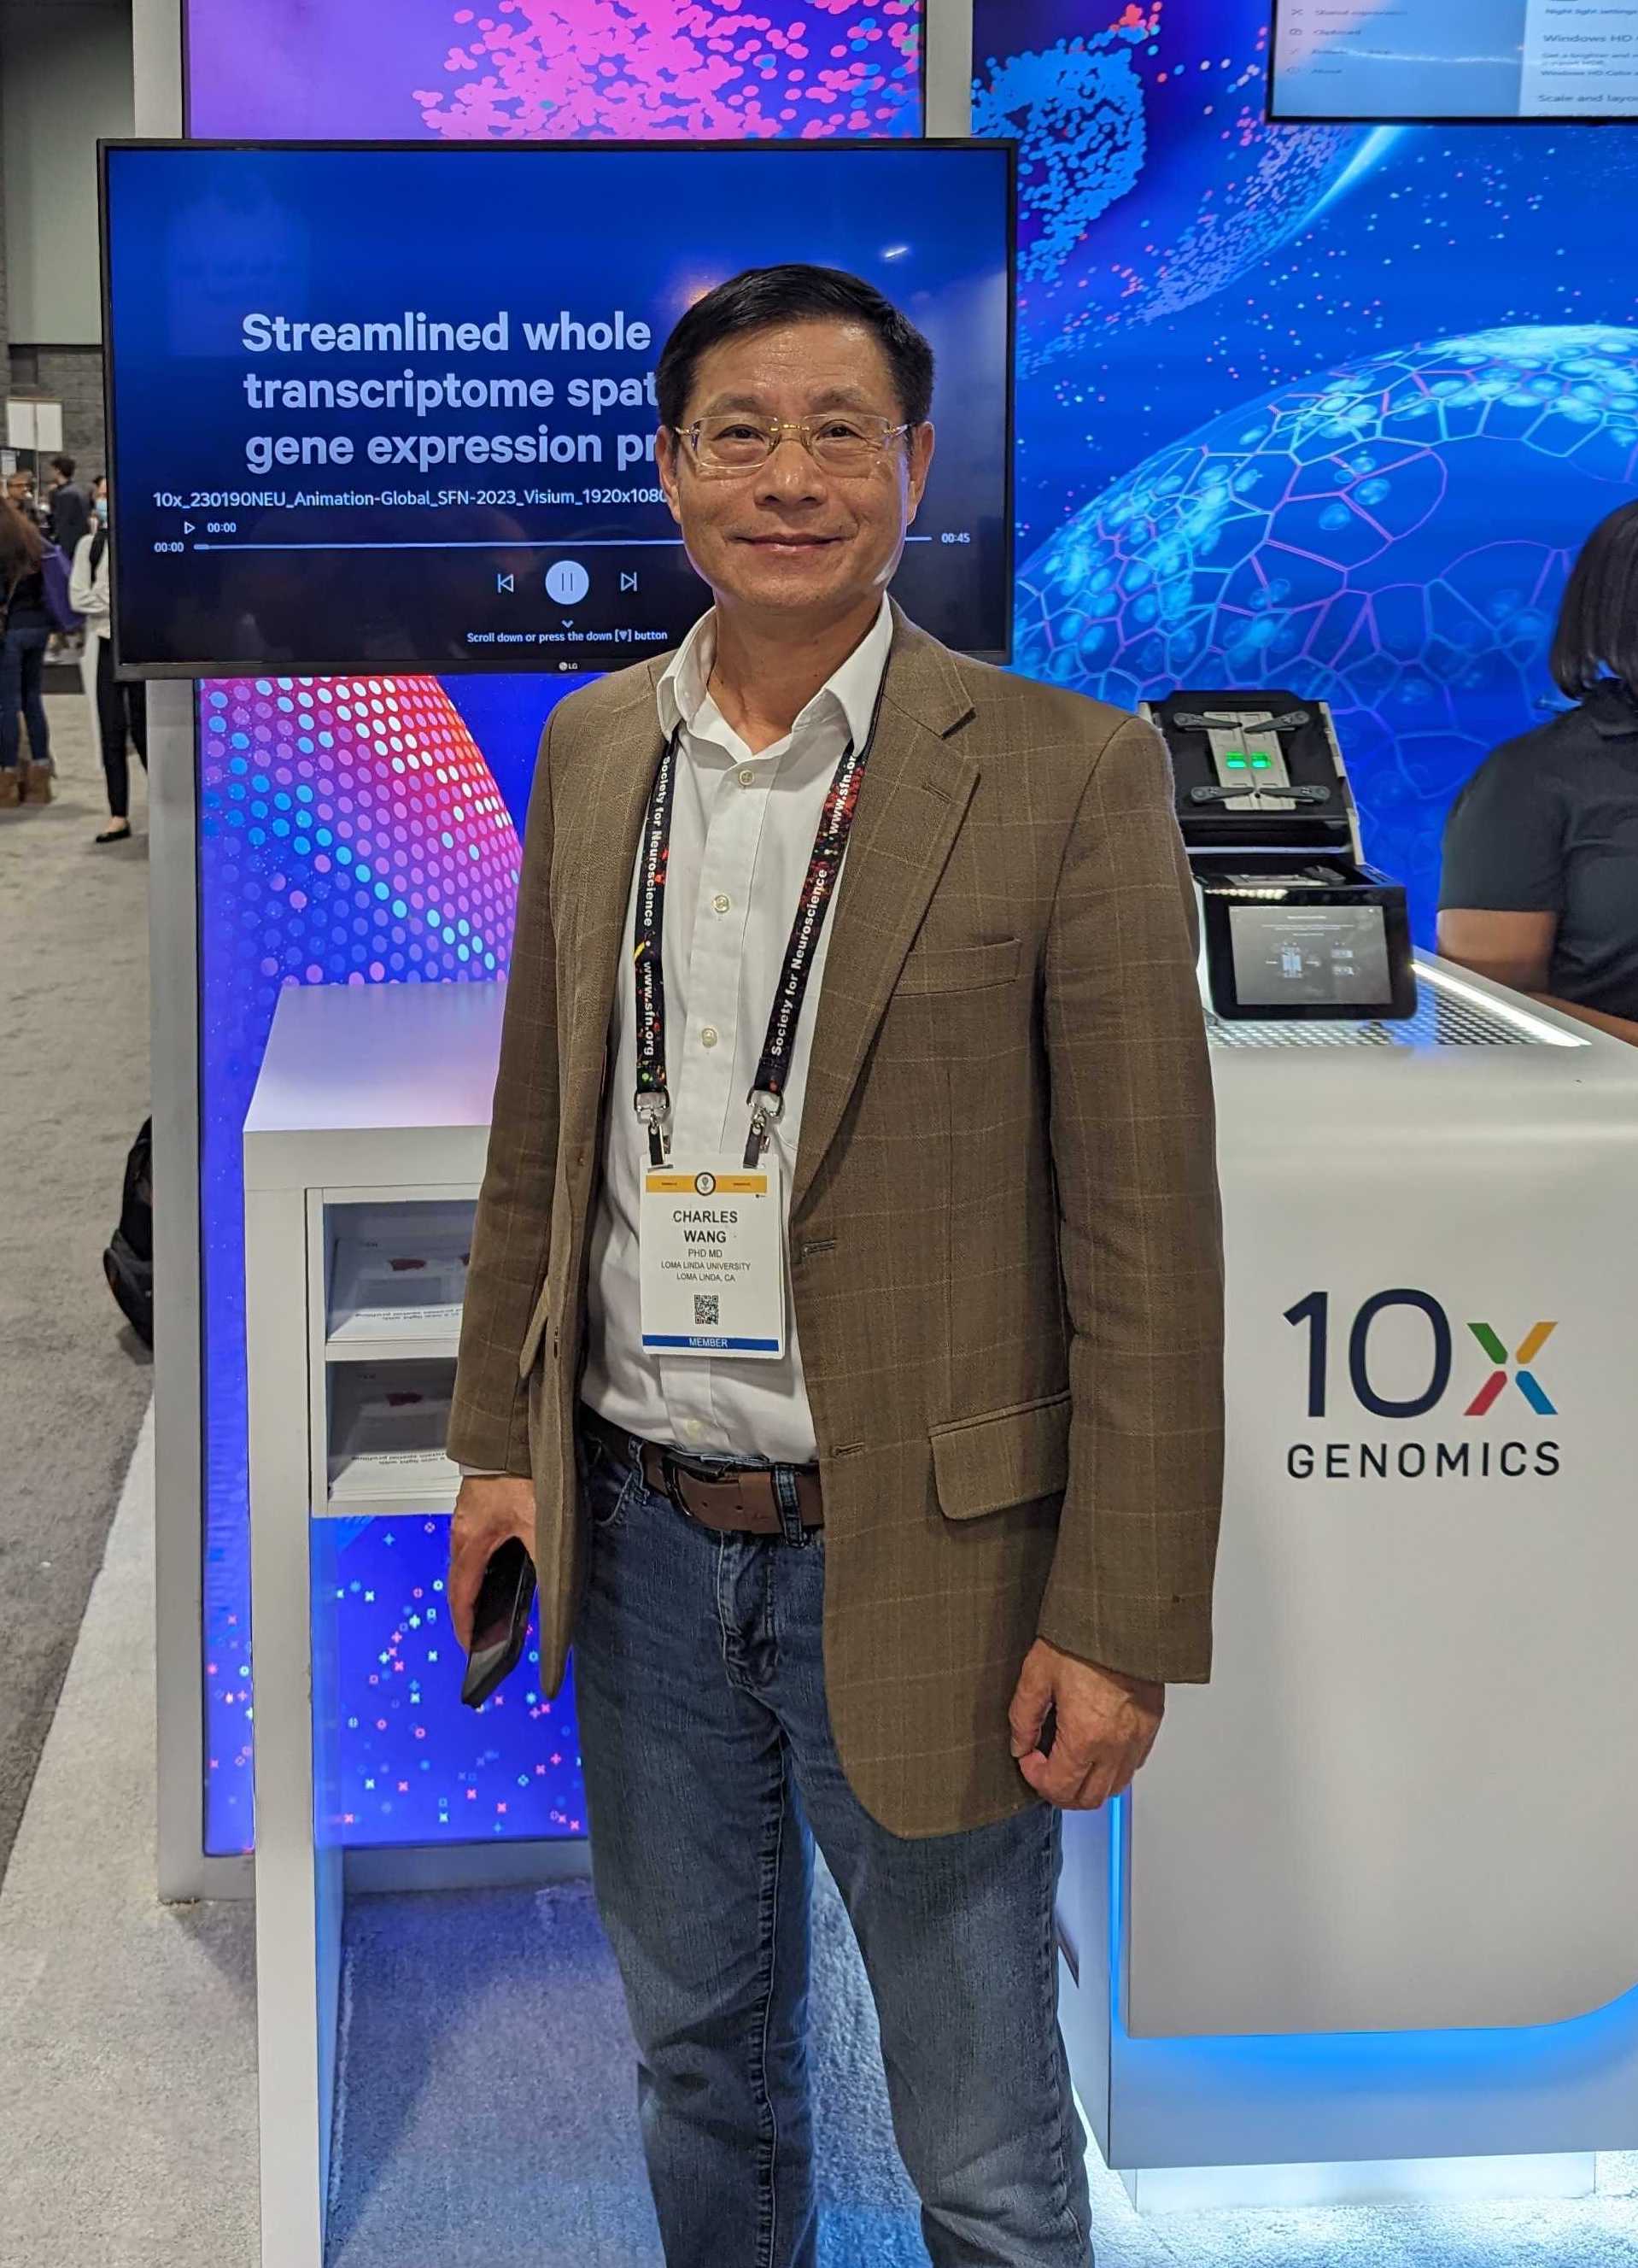 Pictured: The winner of our SfN 2023 poster contest, Dr. Charles Wang!